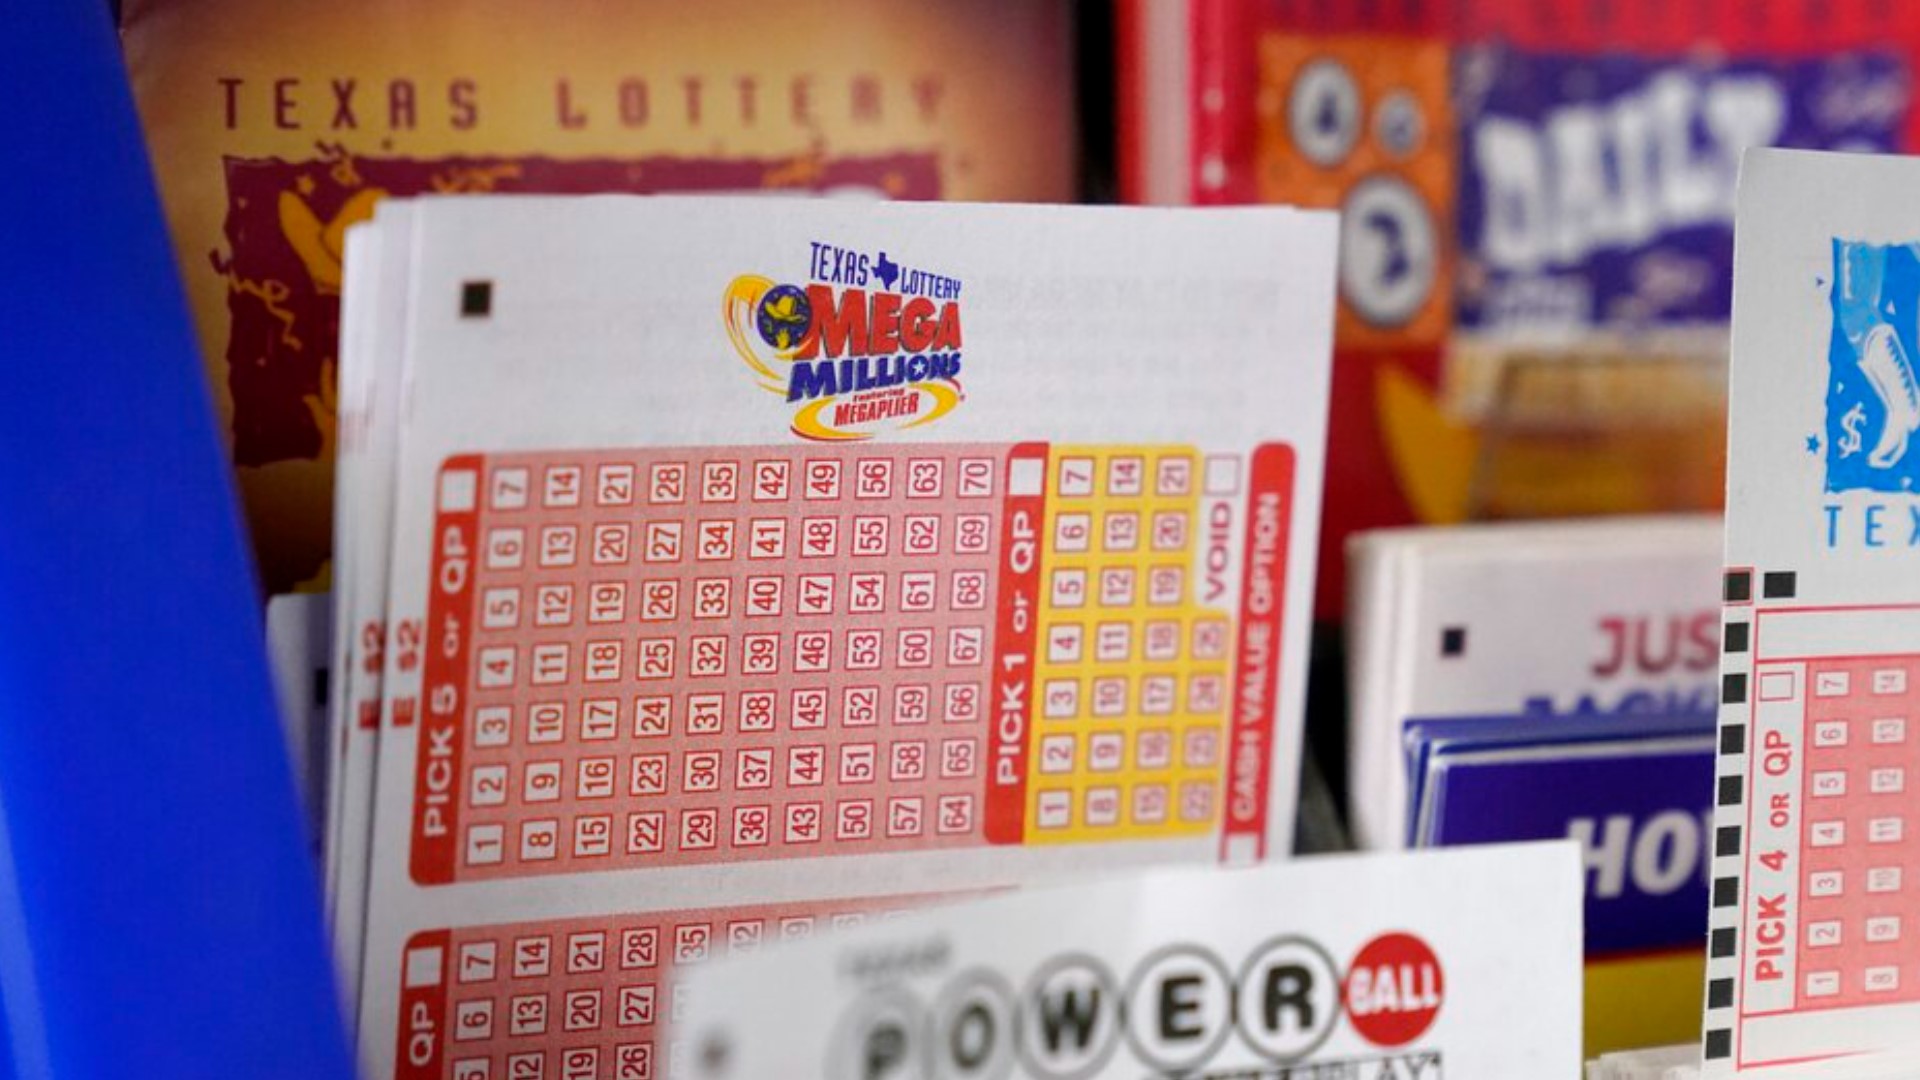 Mega Millions' next drawing is March 12, followed by Powerball the next night.